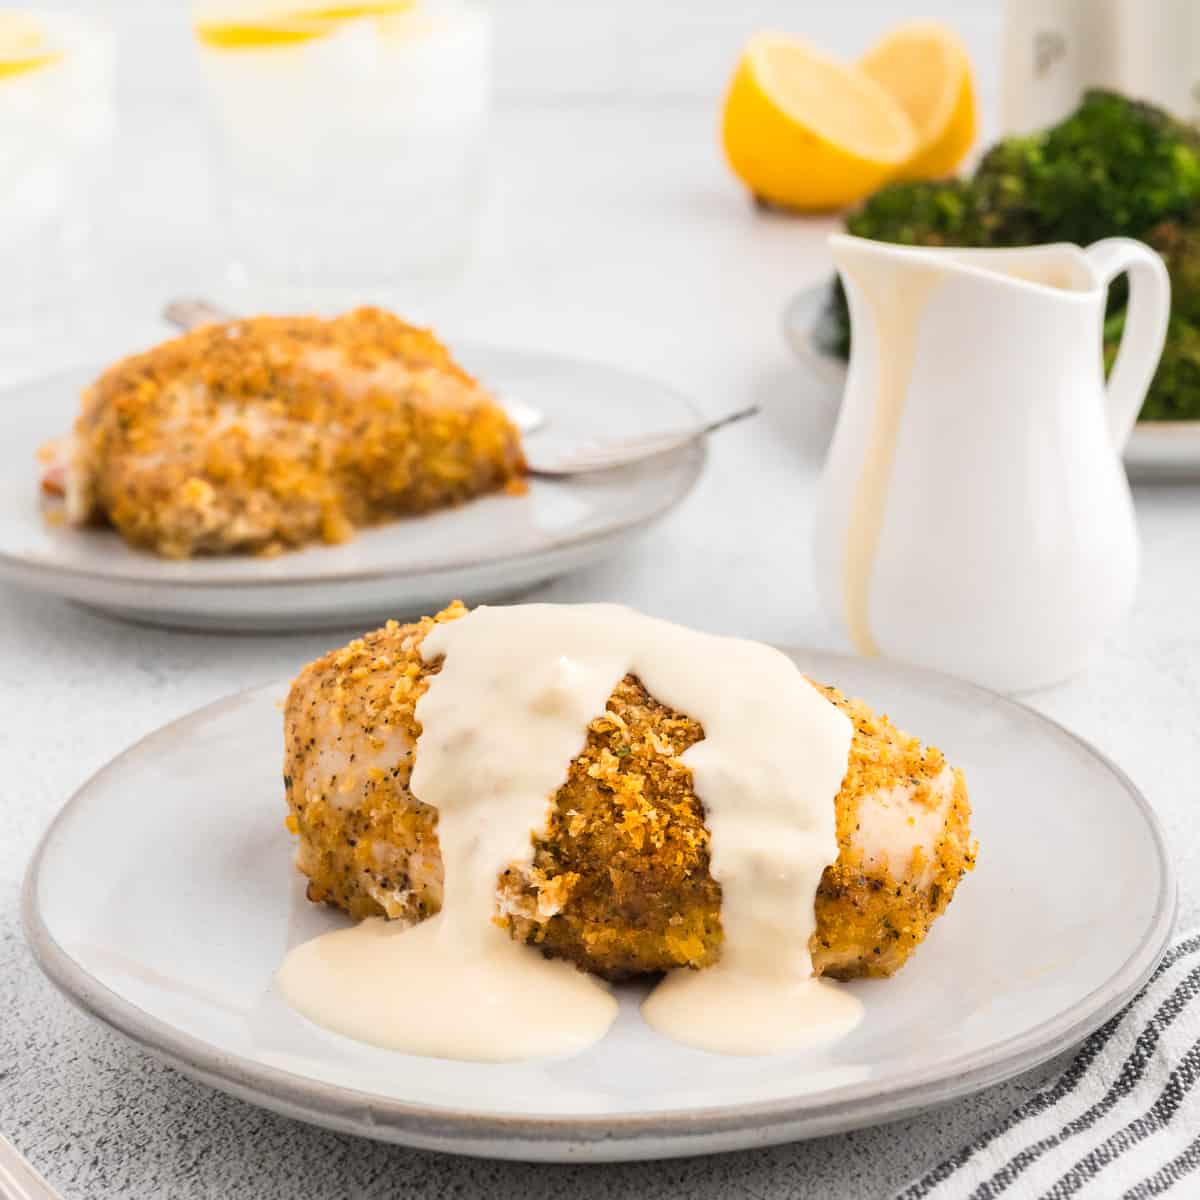 A breast of chicken cordon bleu on a grey plate, drizzled with creamy dijon sauce. Another plate of chicken and a plate of broccoli are in the background.